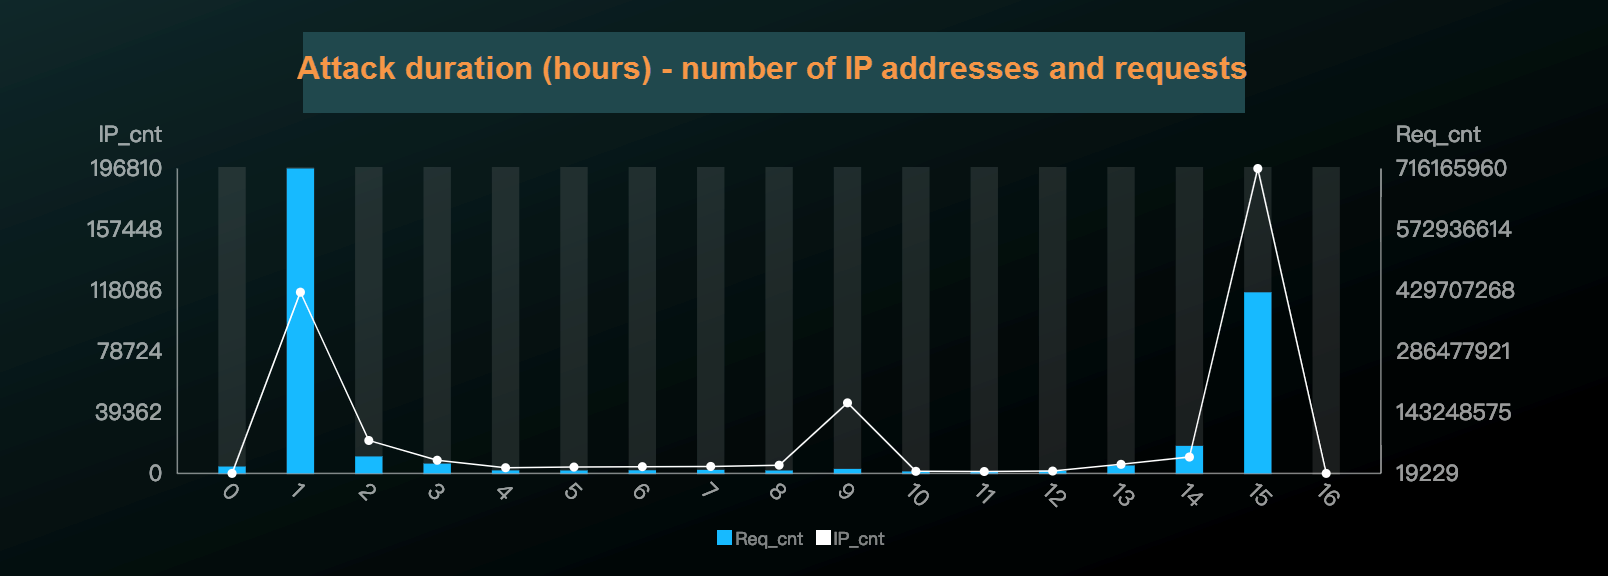 Attack duration and number of ip addresses and requests